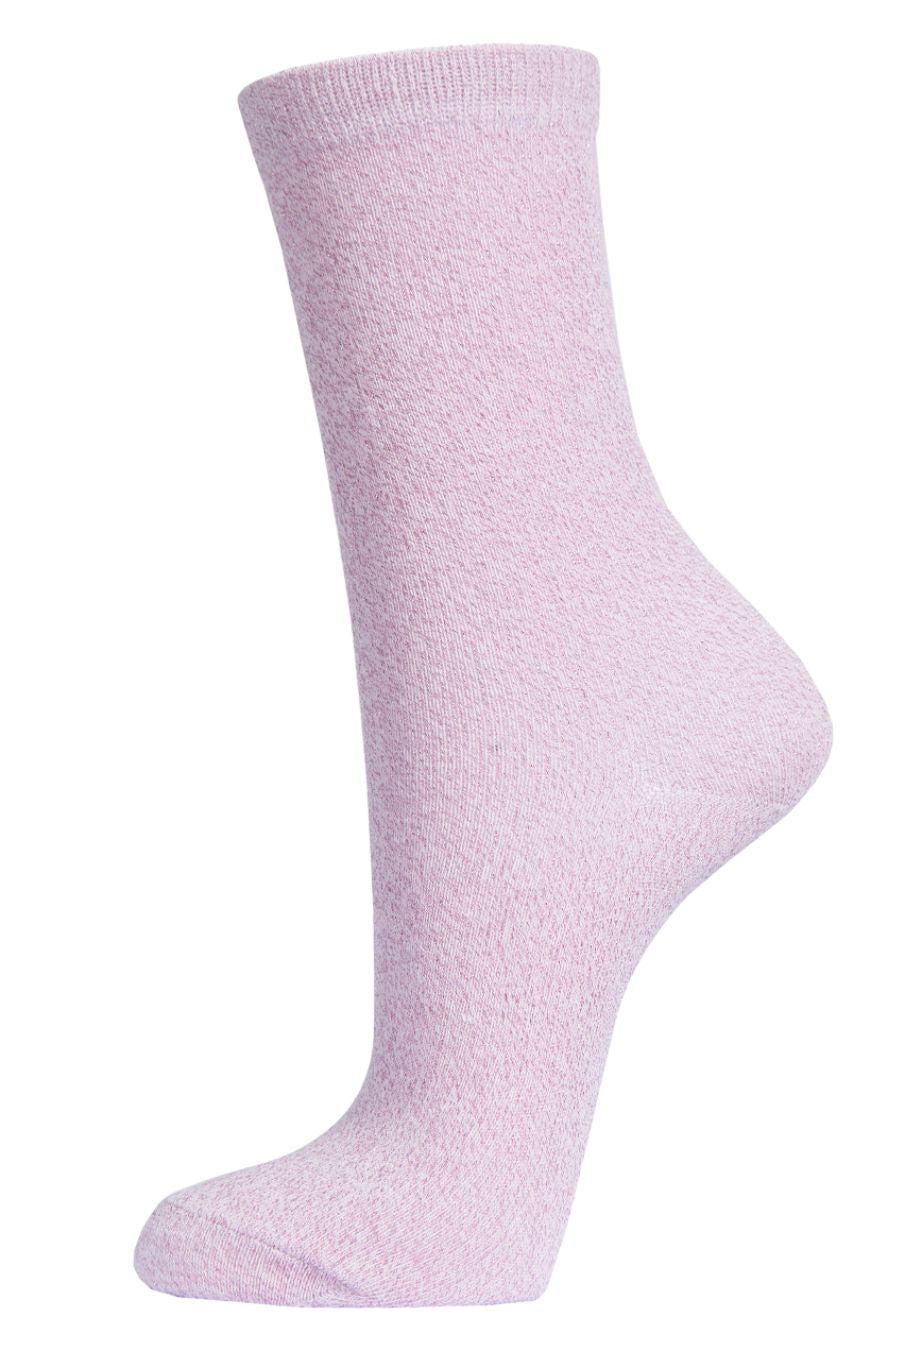 light pink ankle socks with an all over pink glitter shimmer